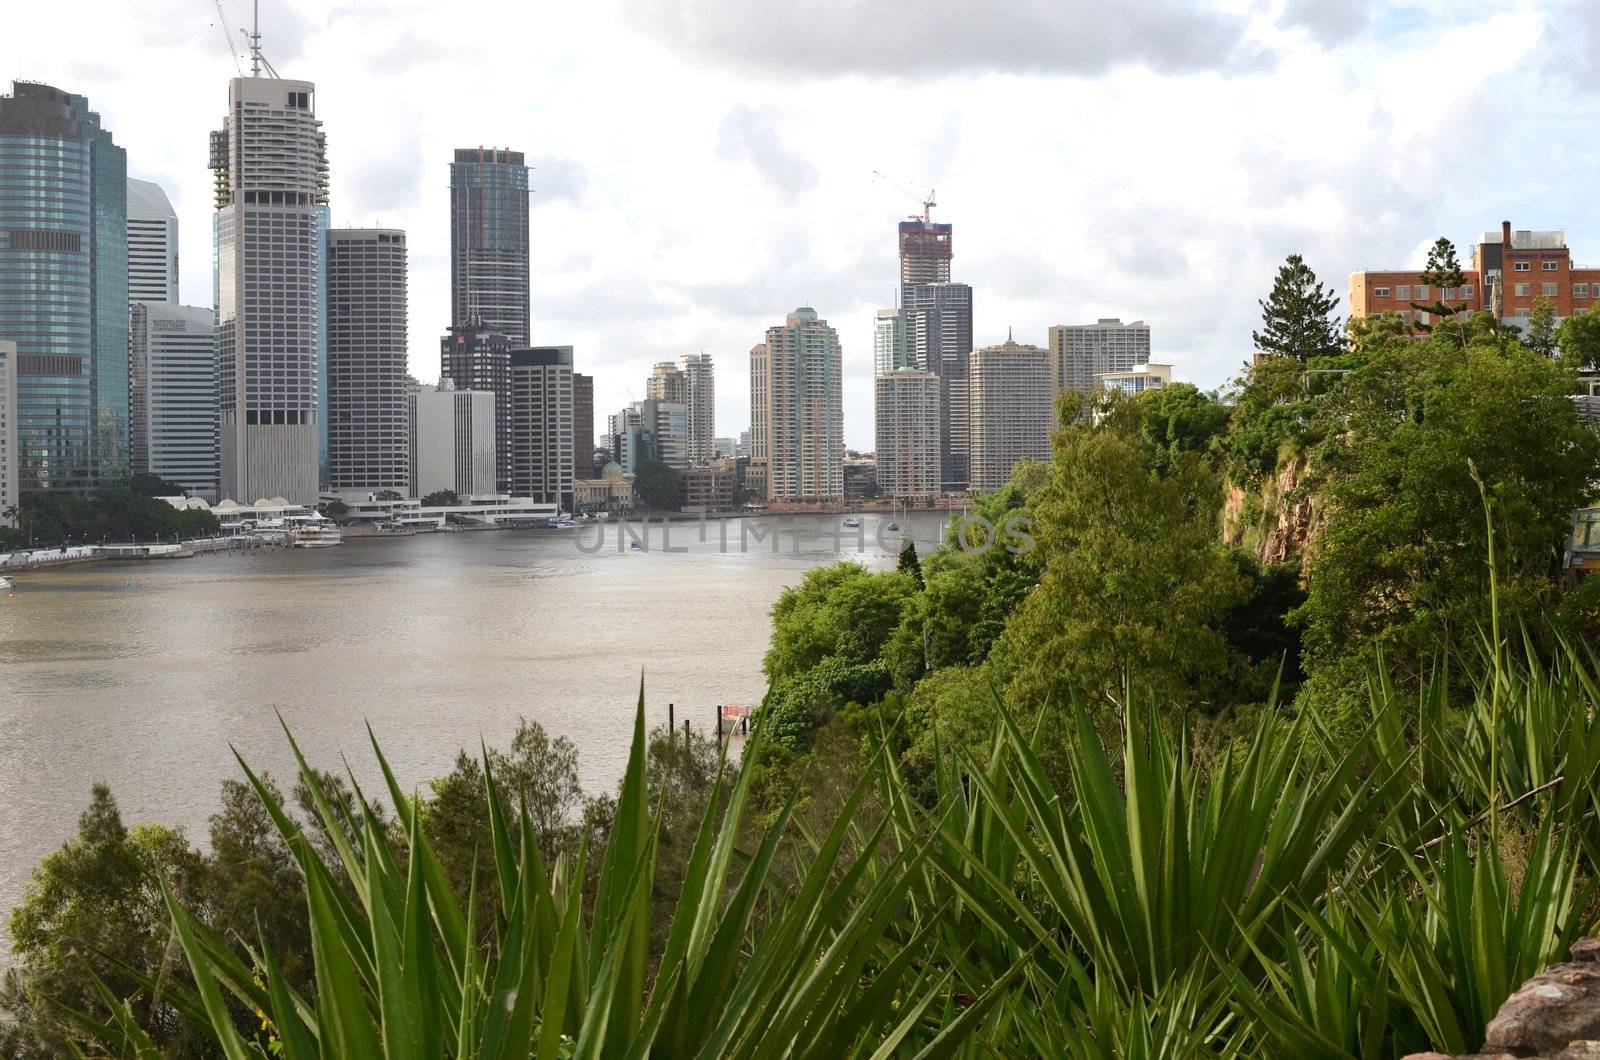 Brisbane, a city of around two million people is the capital of Queensland, Australia. This photo was taken from the top of Kangaroo Point cliffs.